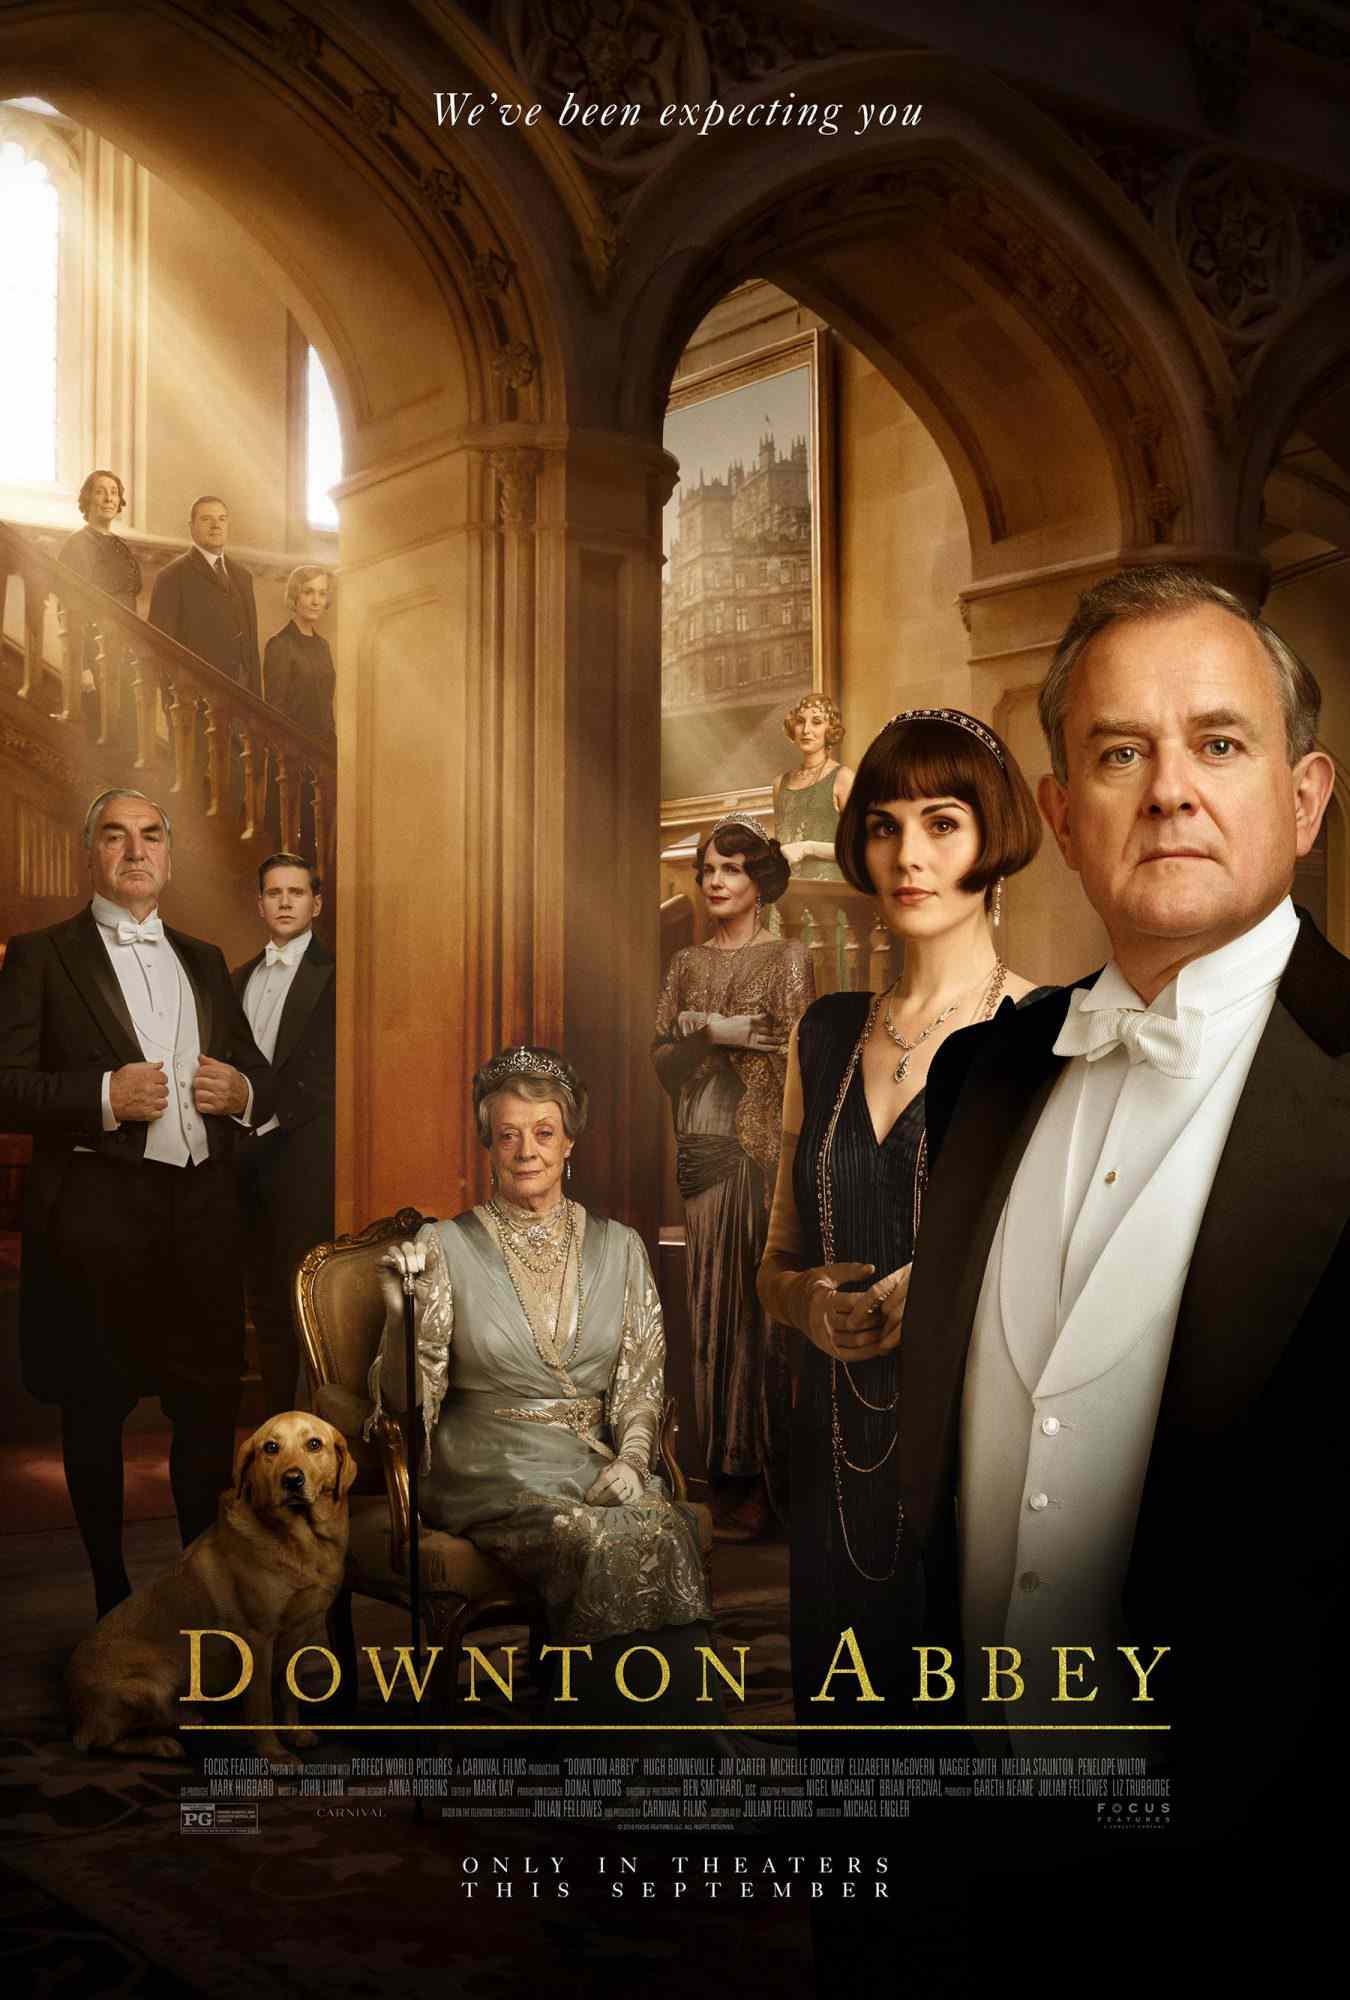 Downton Abbey the Movie poster CR: Focus Features